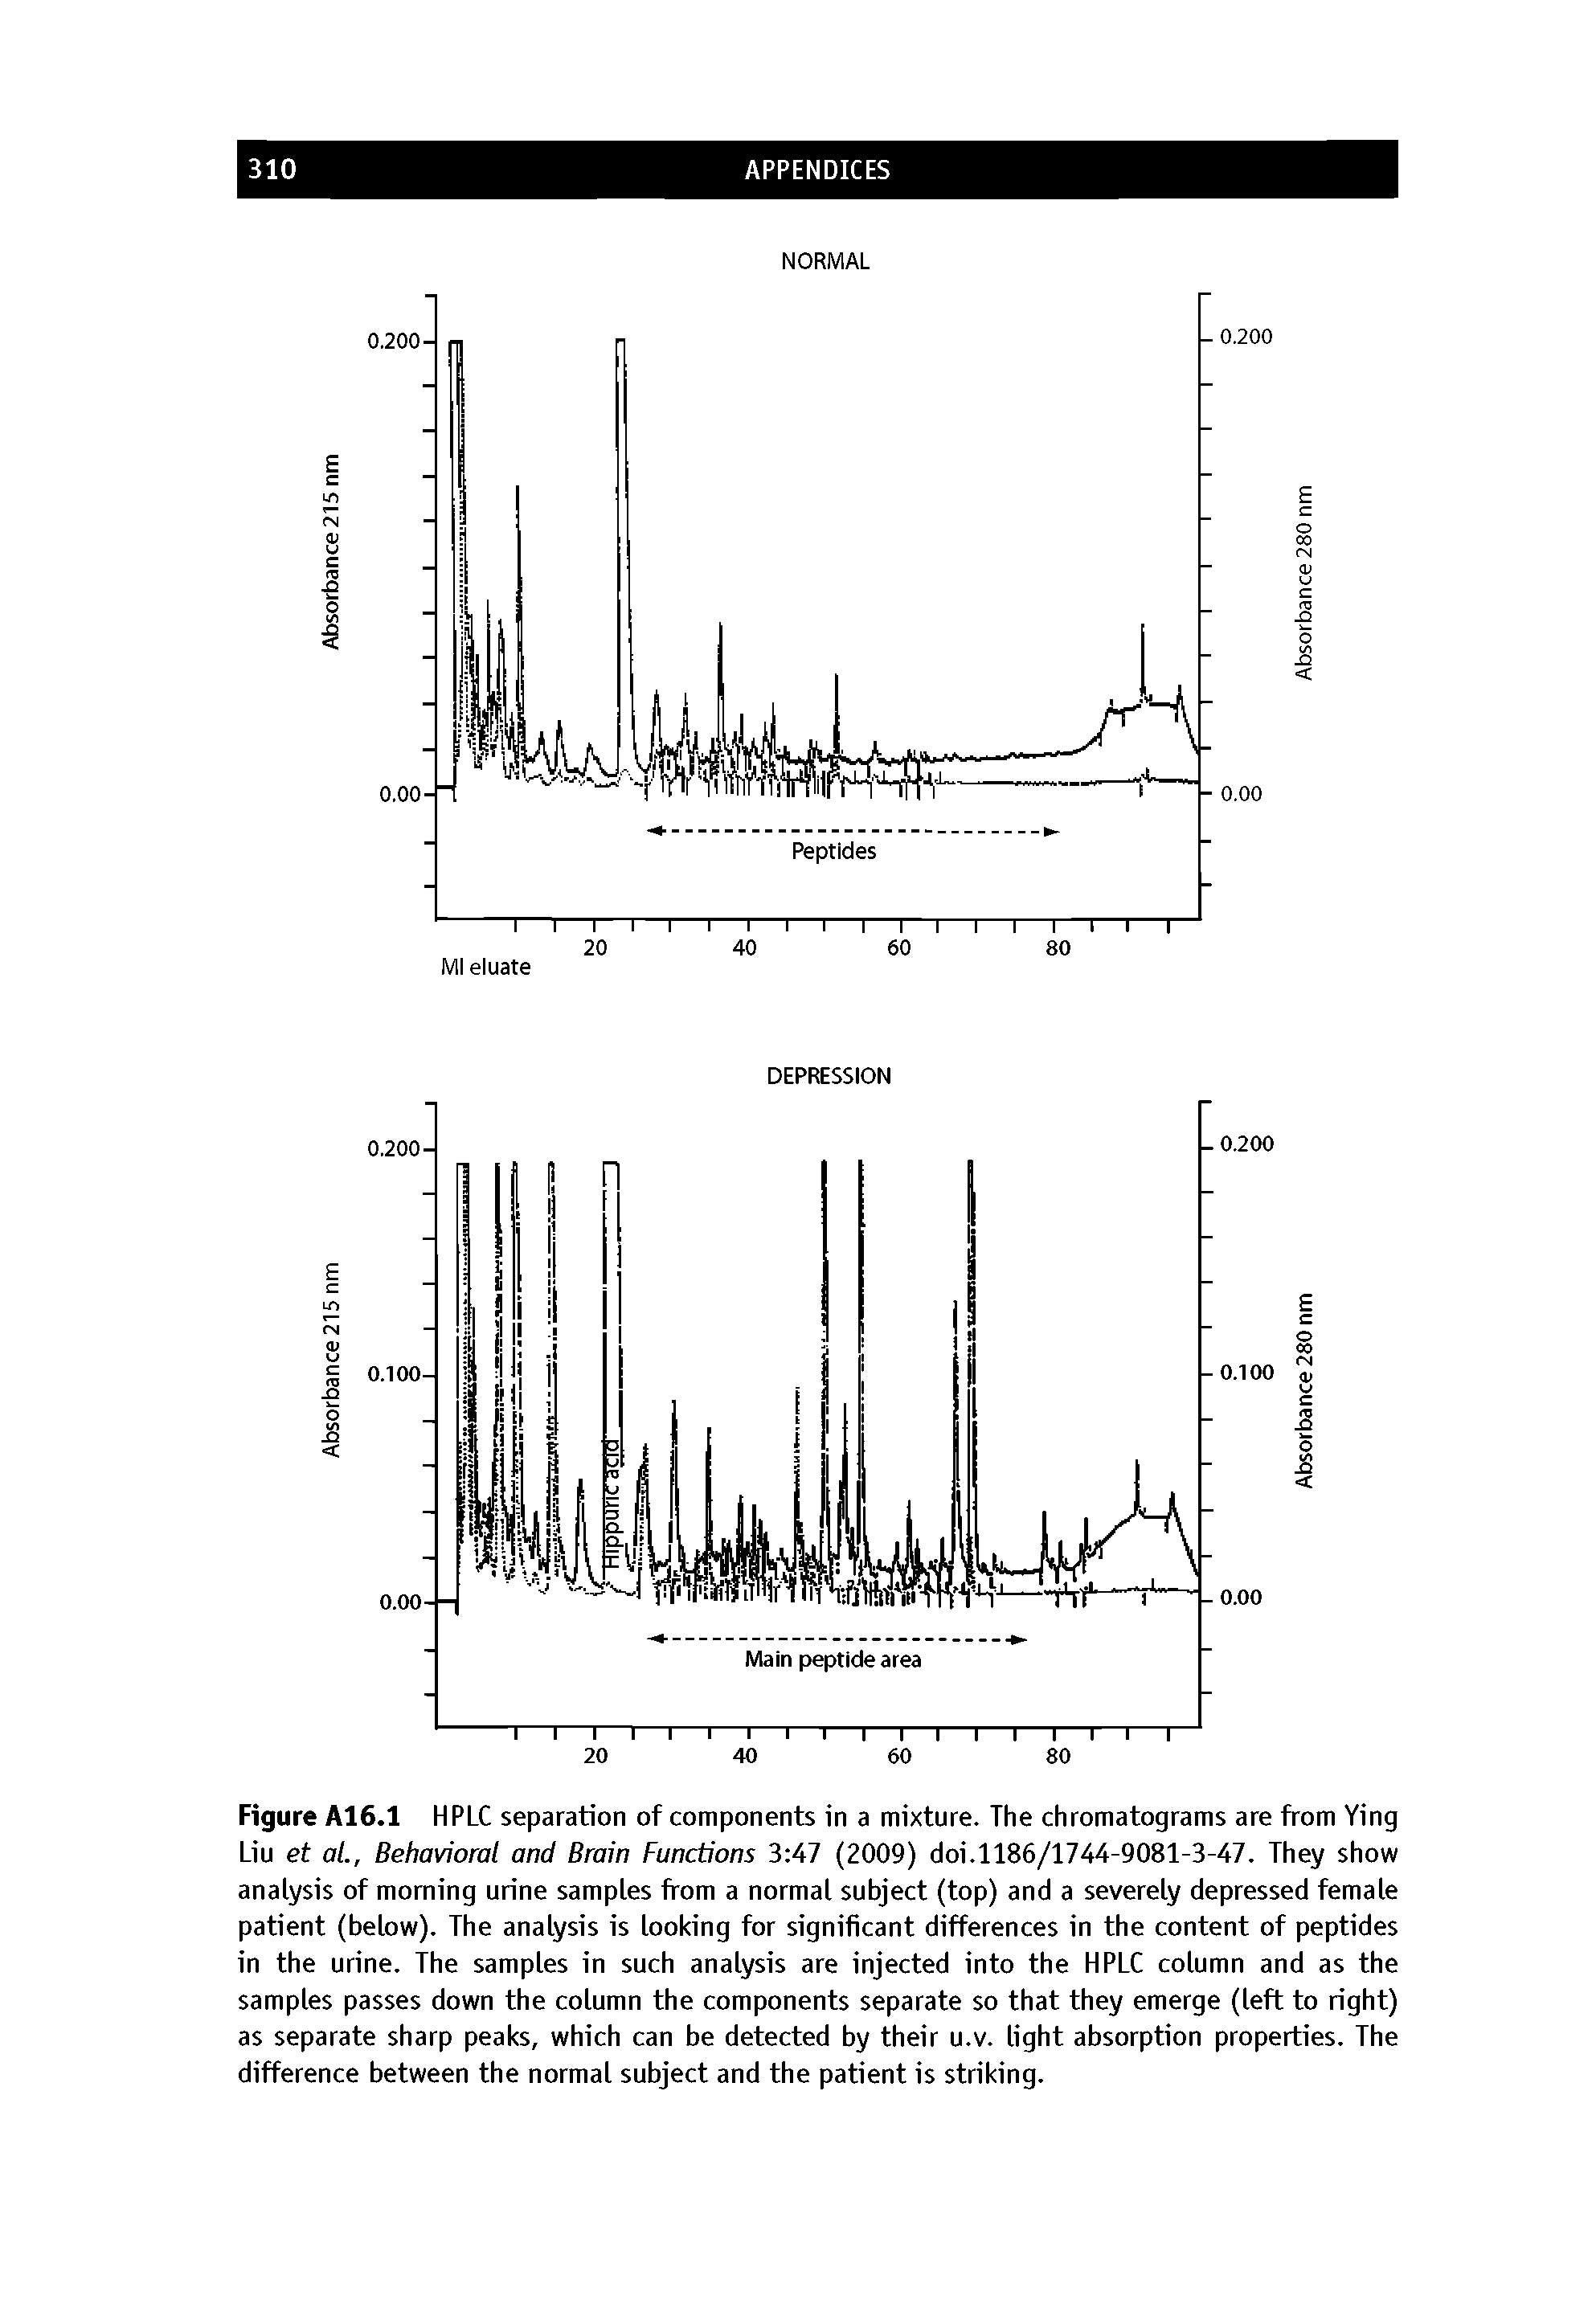 Figure A16.1 HPLC separation of components in a mixture. The chromatograms are from Ying Liu et al.. Behavioral and Brain Functions 3 47 (2009) doi.1186/1744-9081-3-47. They show analysis of morning urine samples from a normal subject (top) and a severely depressed female patient (below). The analysis is looking for significant differences in the content of peptides in the urine. The samples in such analysis are injected into the HPLC column and as the samples passes down the column the components separate so that they emerge (left to right) as separate sharp peaks, which can be detected by their u.v. light absorption properties. The difference between the normal subject and the patient is striking.